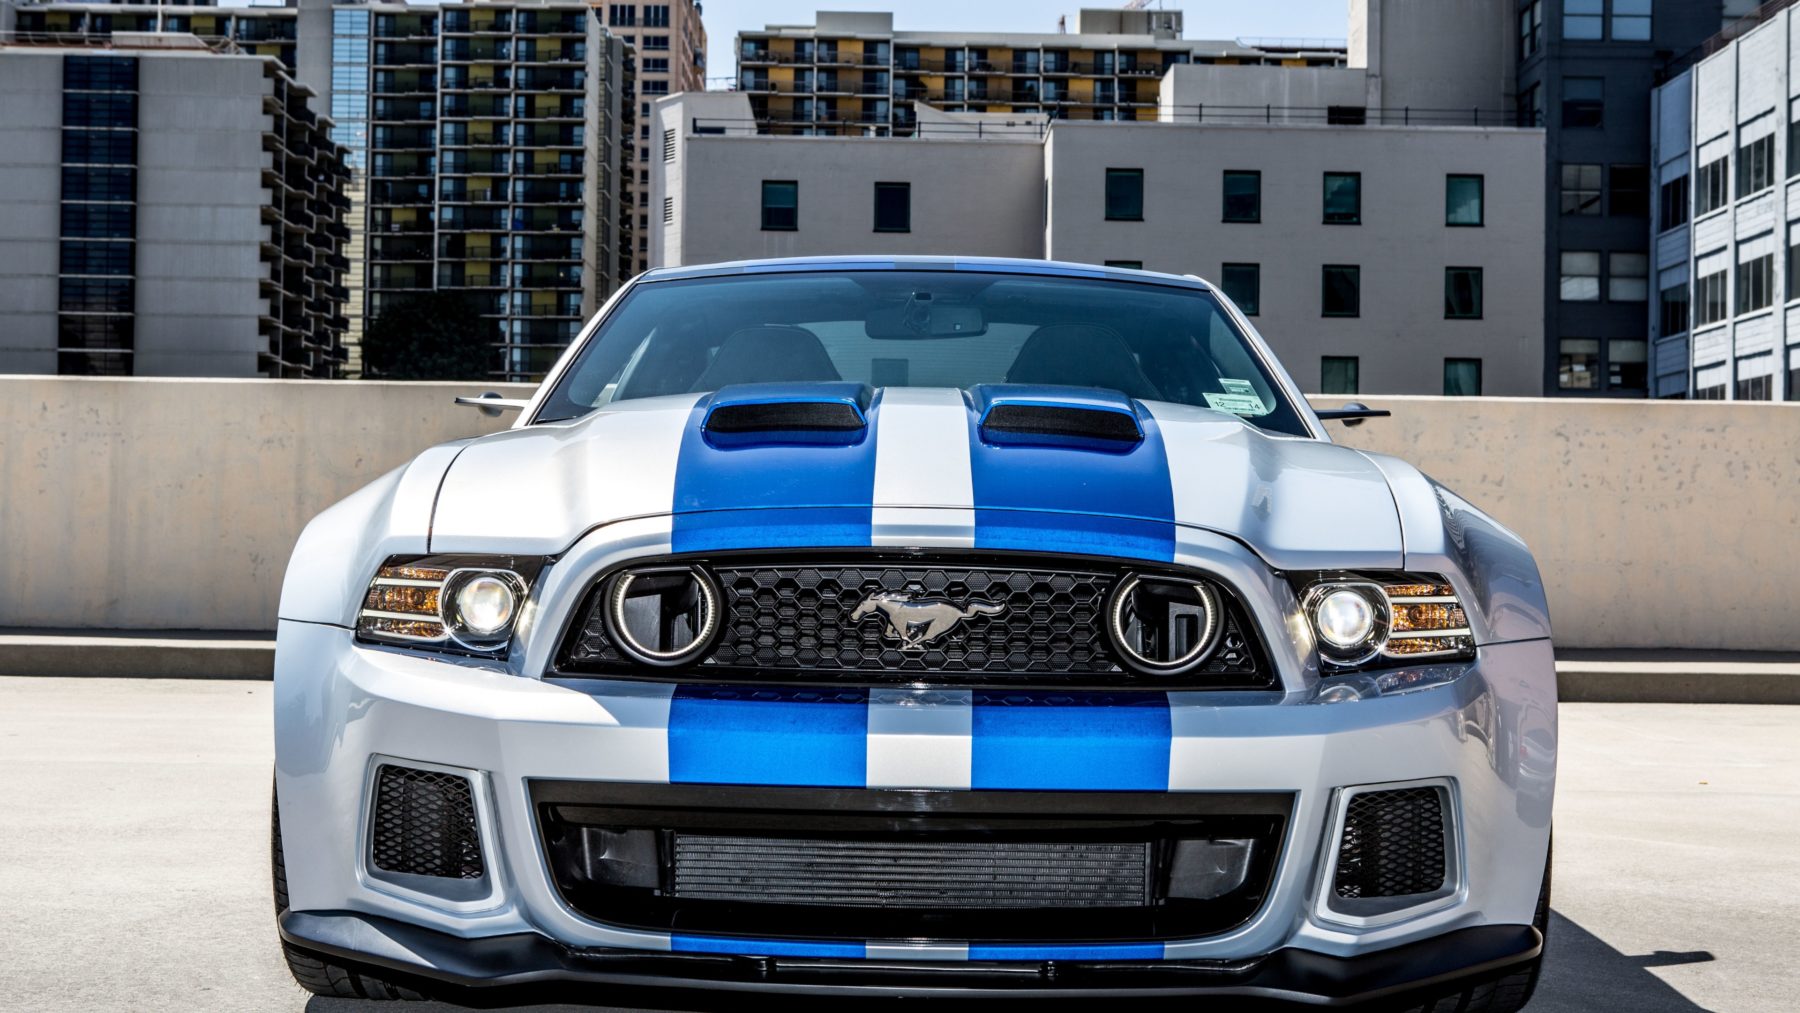 Ford Mustang Gt Front High Resolution Wallpaper New Car